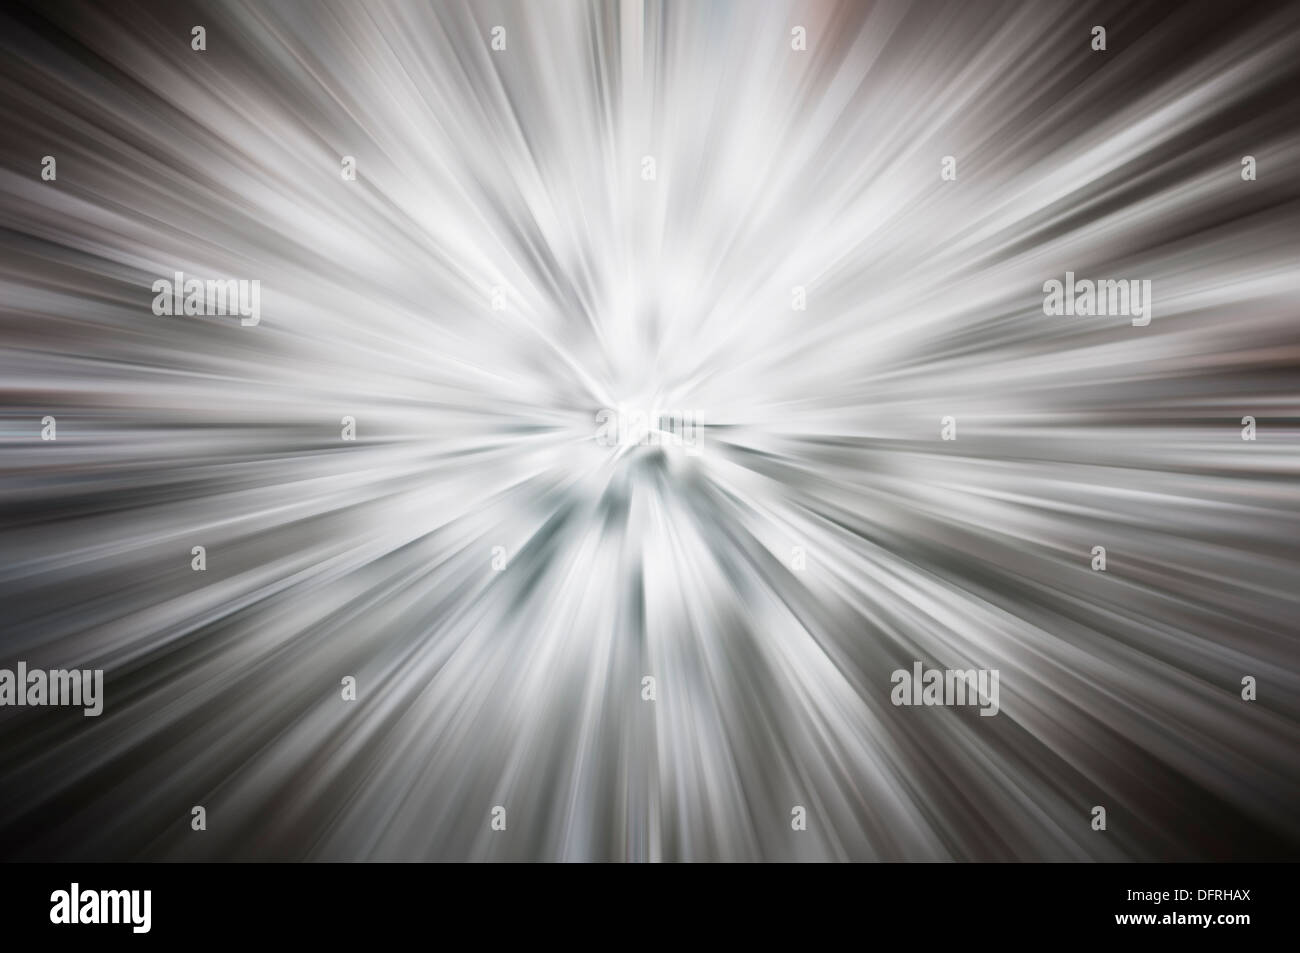 black and white, radial, abstract background Stock Photo - Alamy